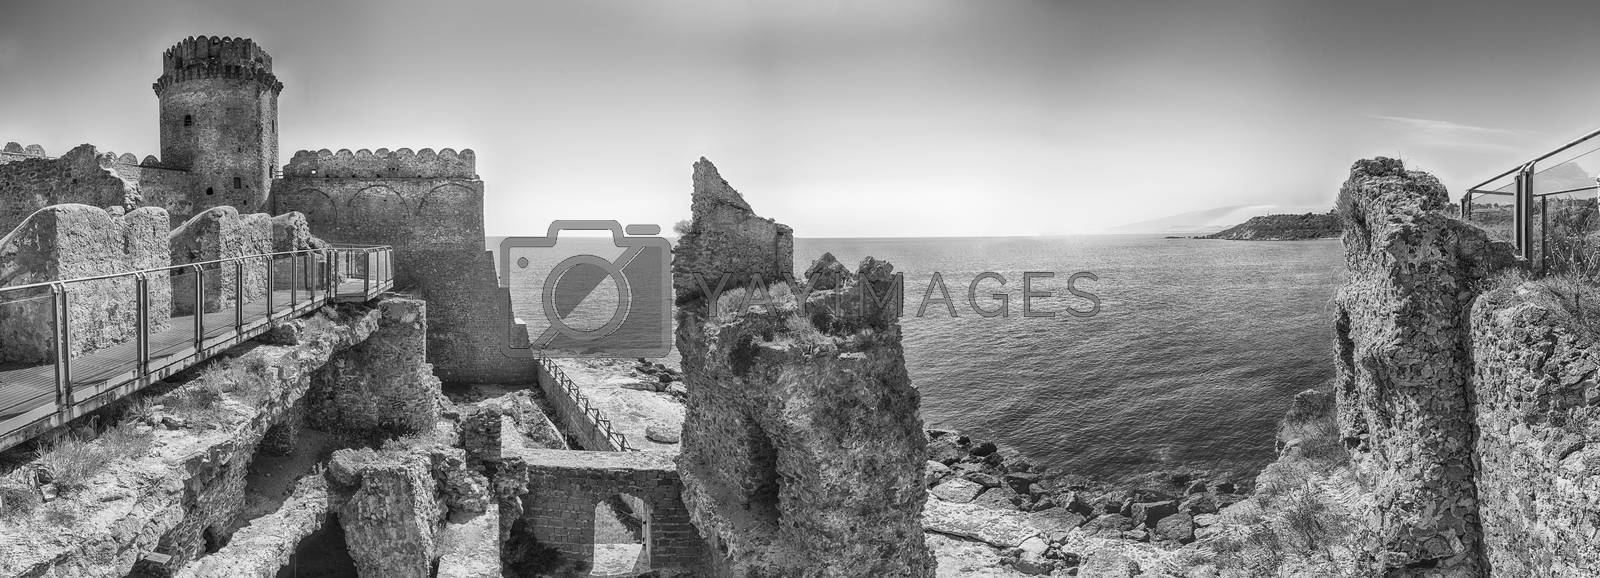 Royalty free image of View of the Aragonese Castle, Isola di Capo Rizzuto, Italy by marcorubino